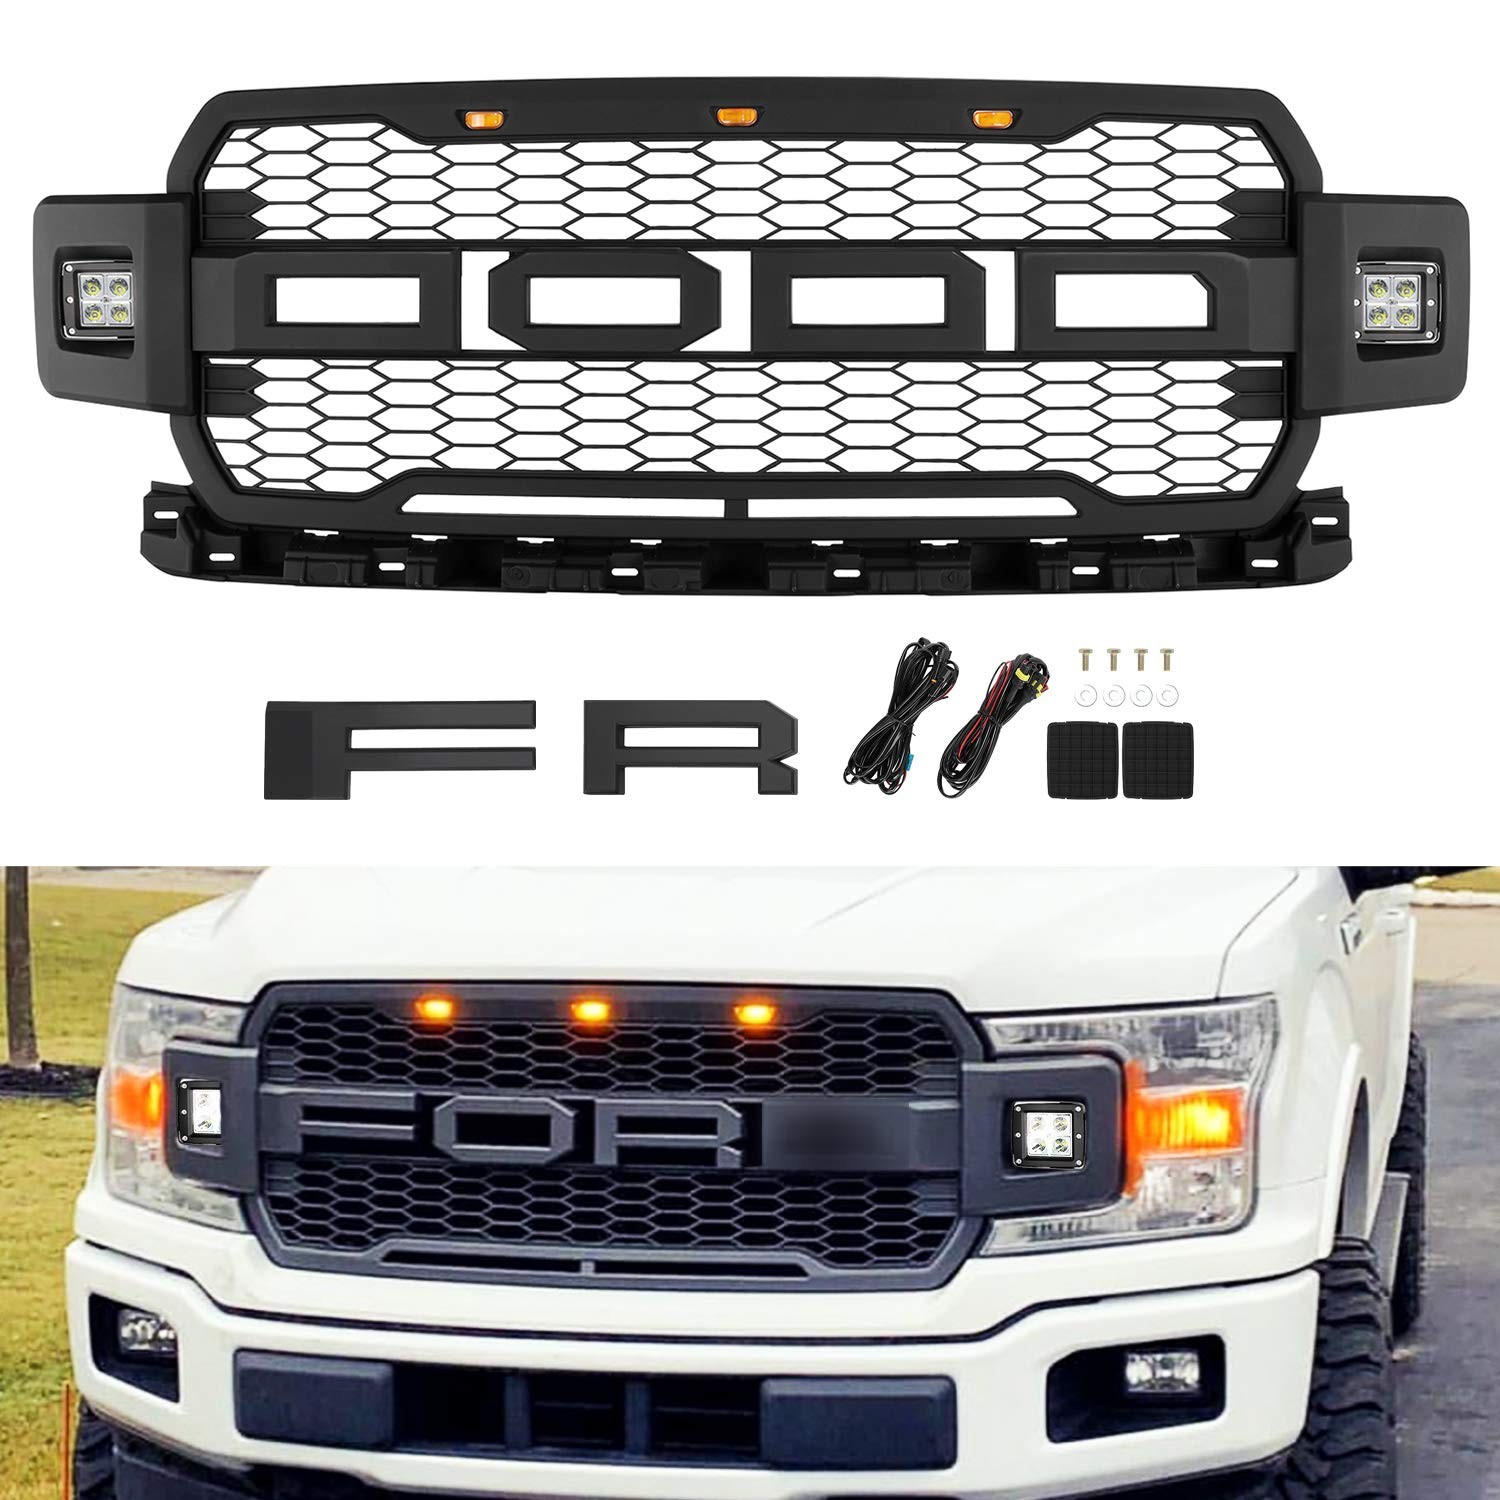 OFFROAD GAMERS Auto Front Grille Lights Compatible With 2004-2019 Ford F150 Smoked Lens 6 Pack Front Grille Driving Light Kit for Pickup SUV 